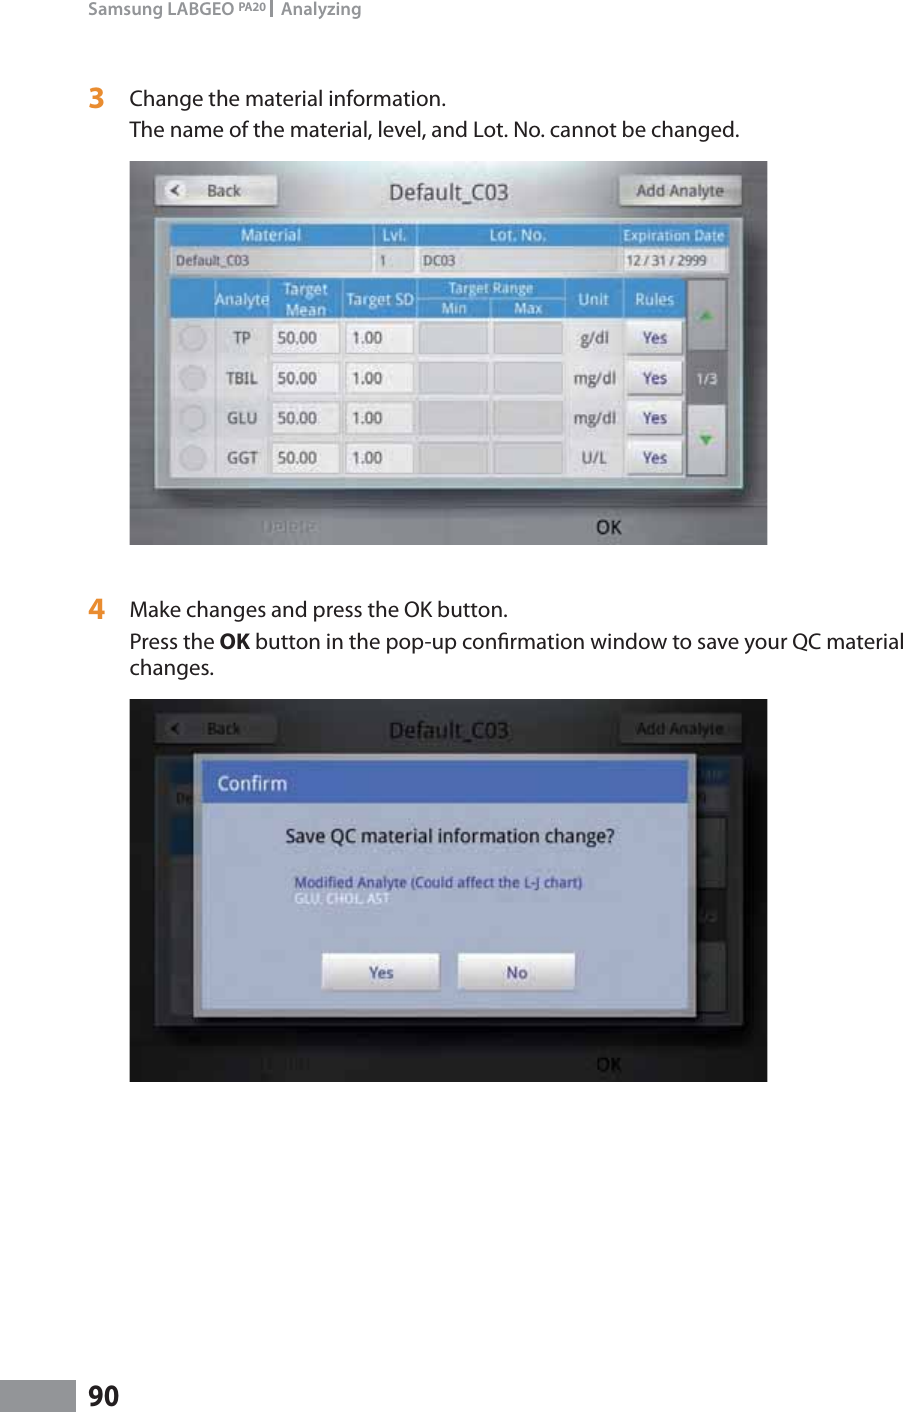 90Samsung LABGEO PA20   Analyzing3  Change the material information. The name of the material, level, and Lot. No. cannot be changed.4  Make changes and press the OK button.Press the OK button in the pop-up conrmation window to save your QC material changes.